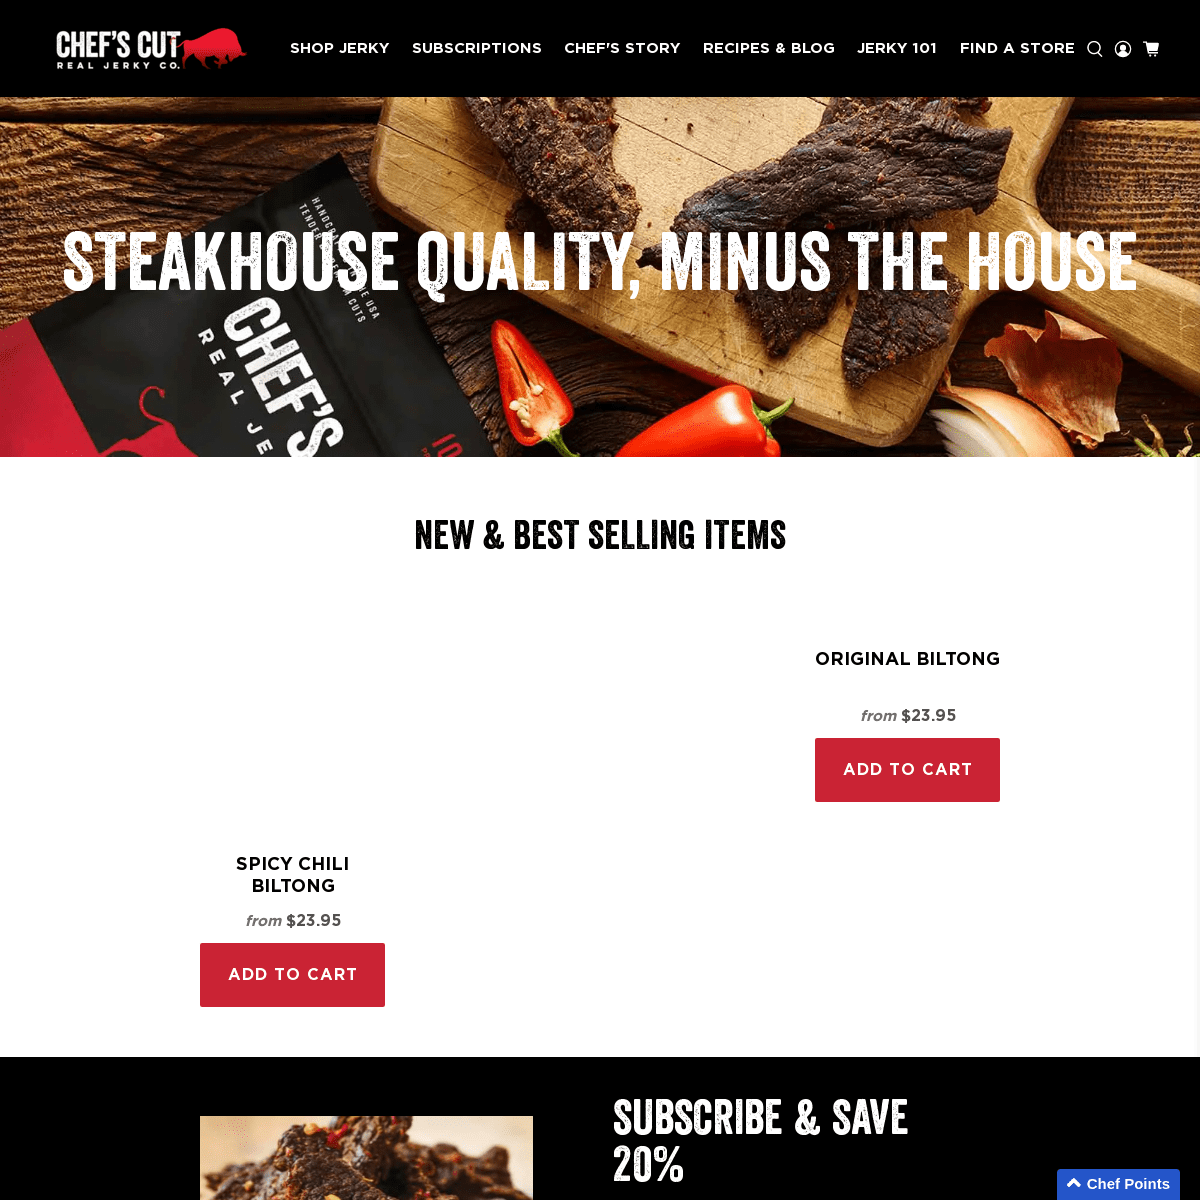 A complete backup of https://chefscutrealjerky.com